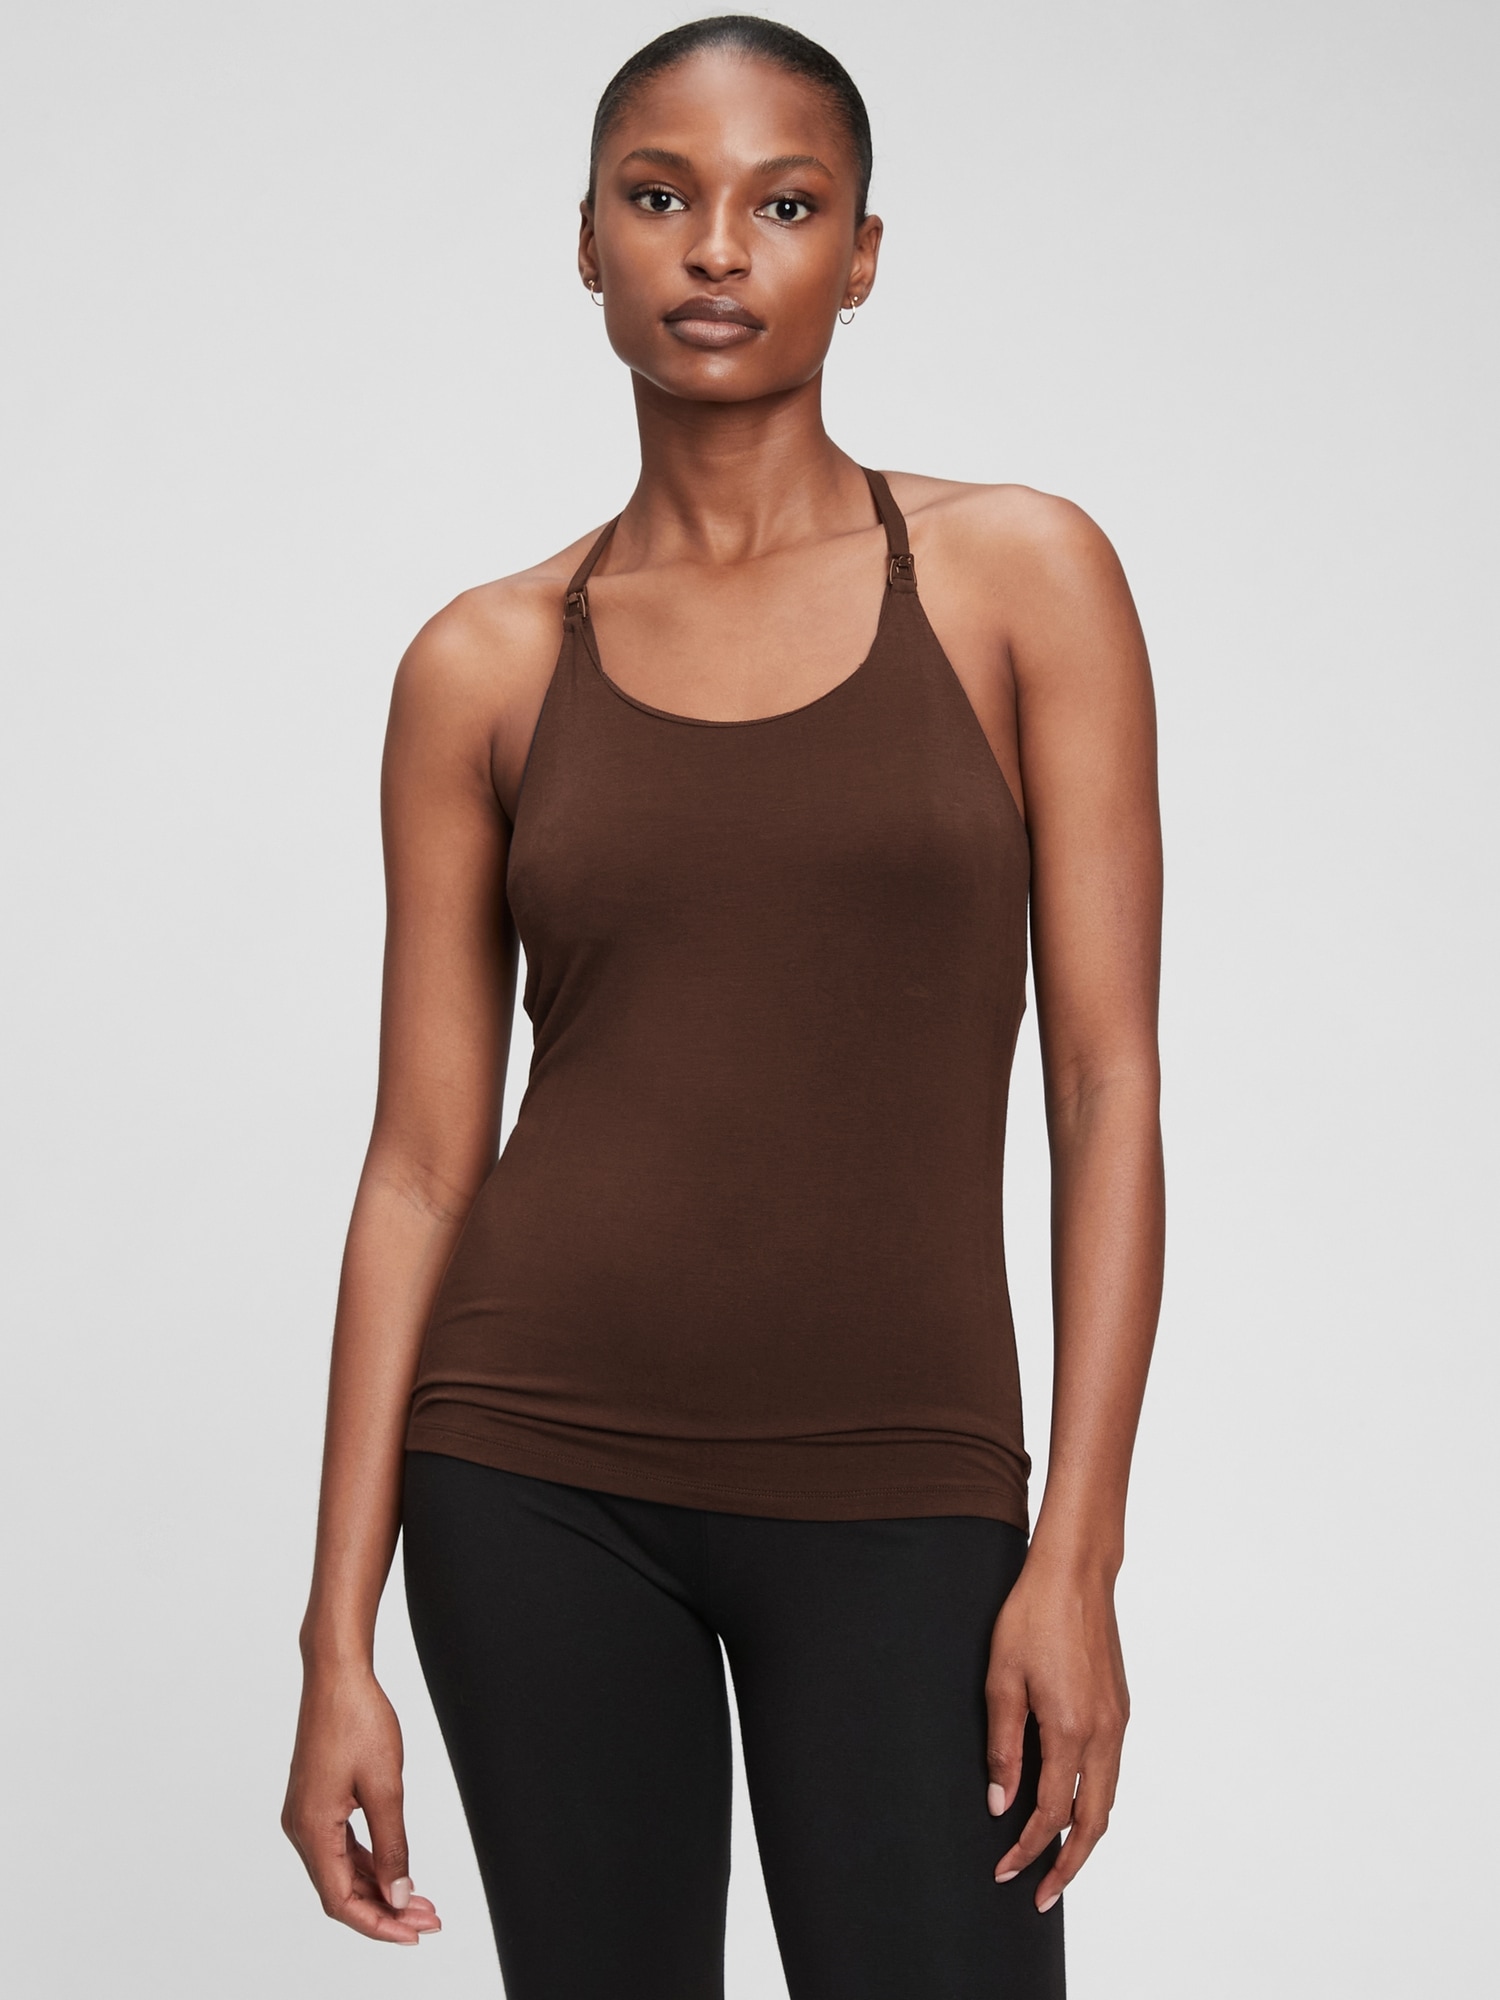 Lined Cami Bra Top with Adjustable Straps